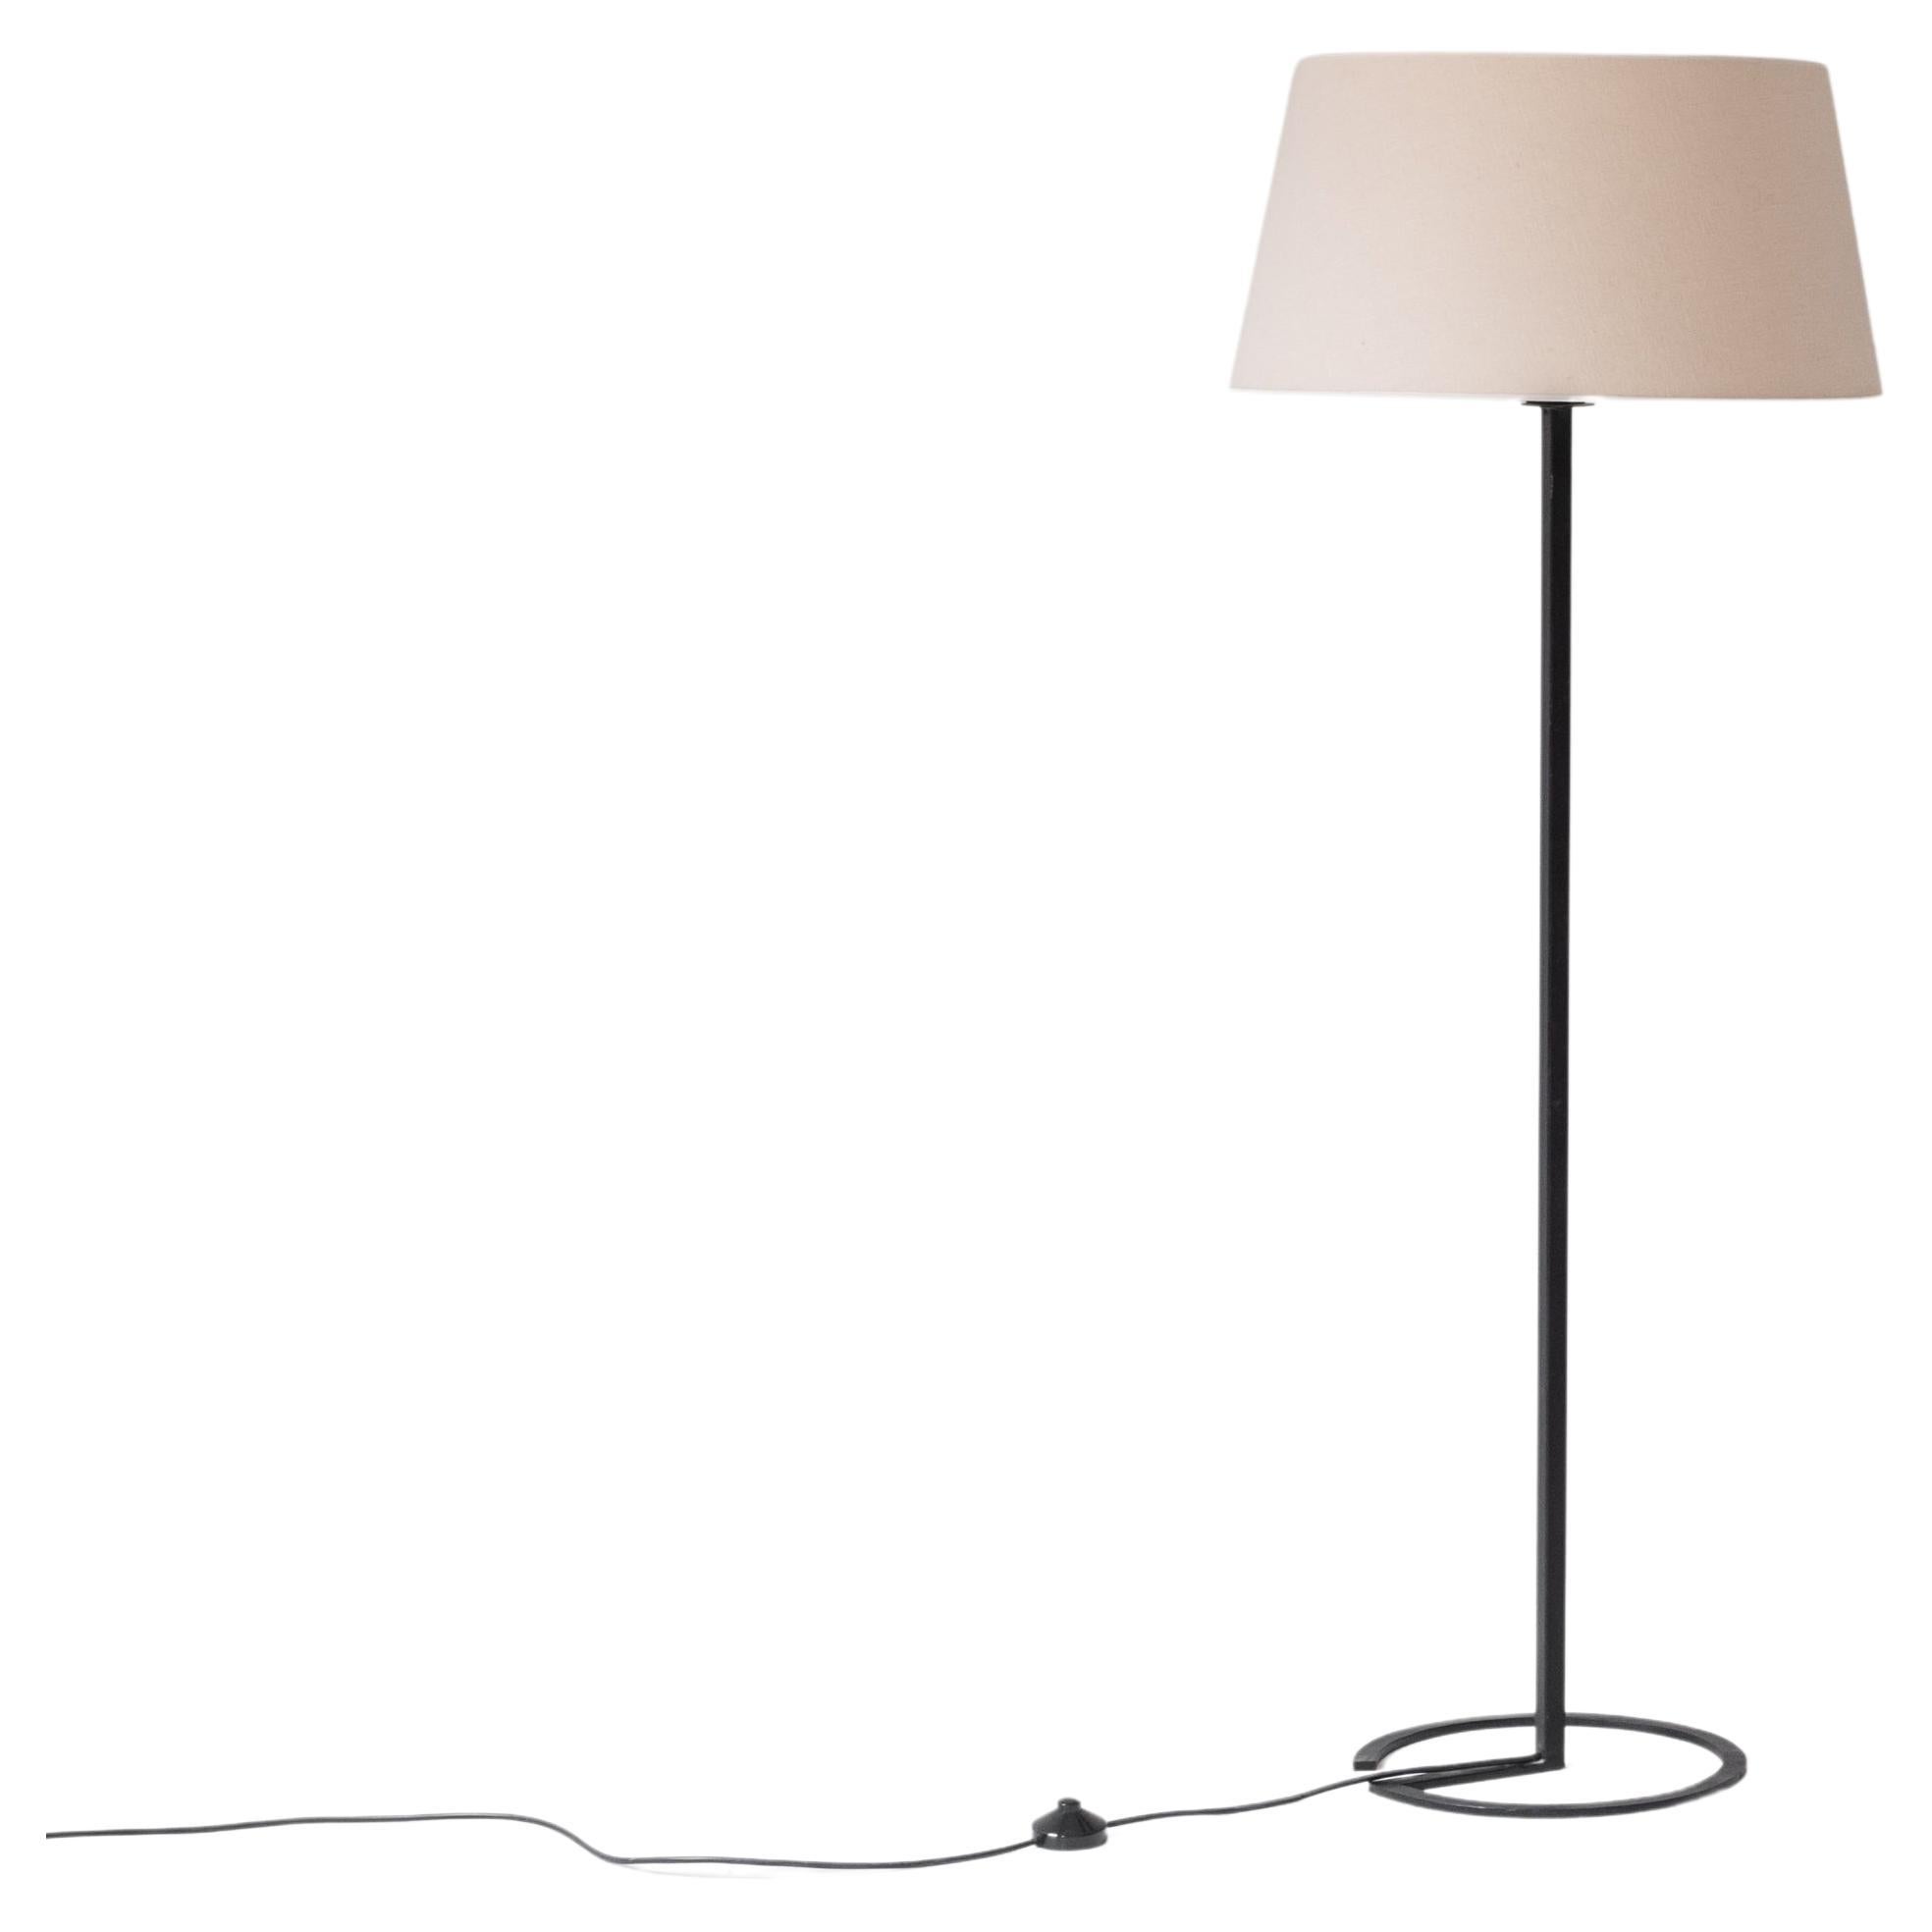 Floor lamp from France, designed and manufactured during the 1950s. For Sale